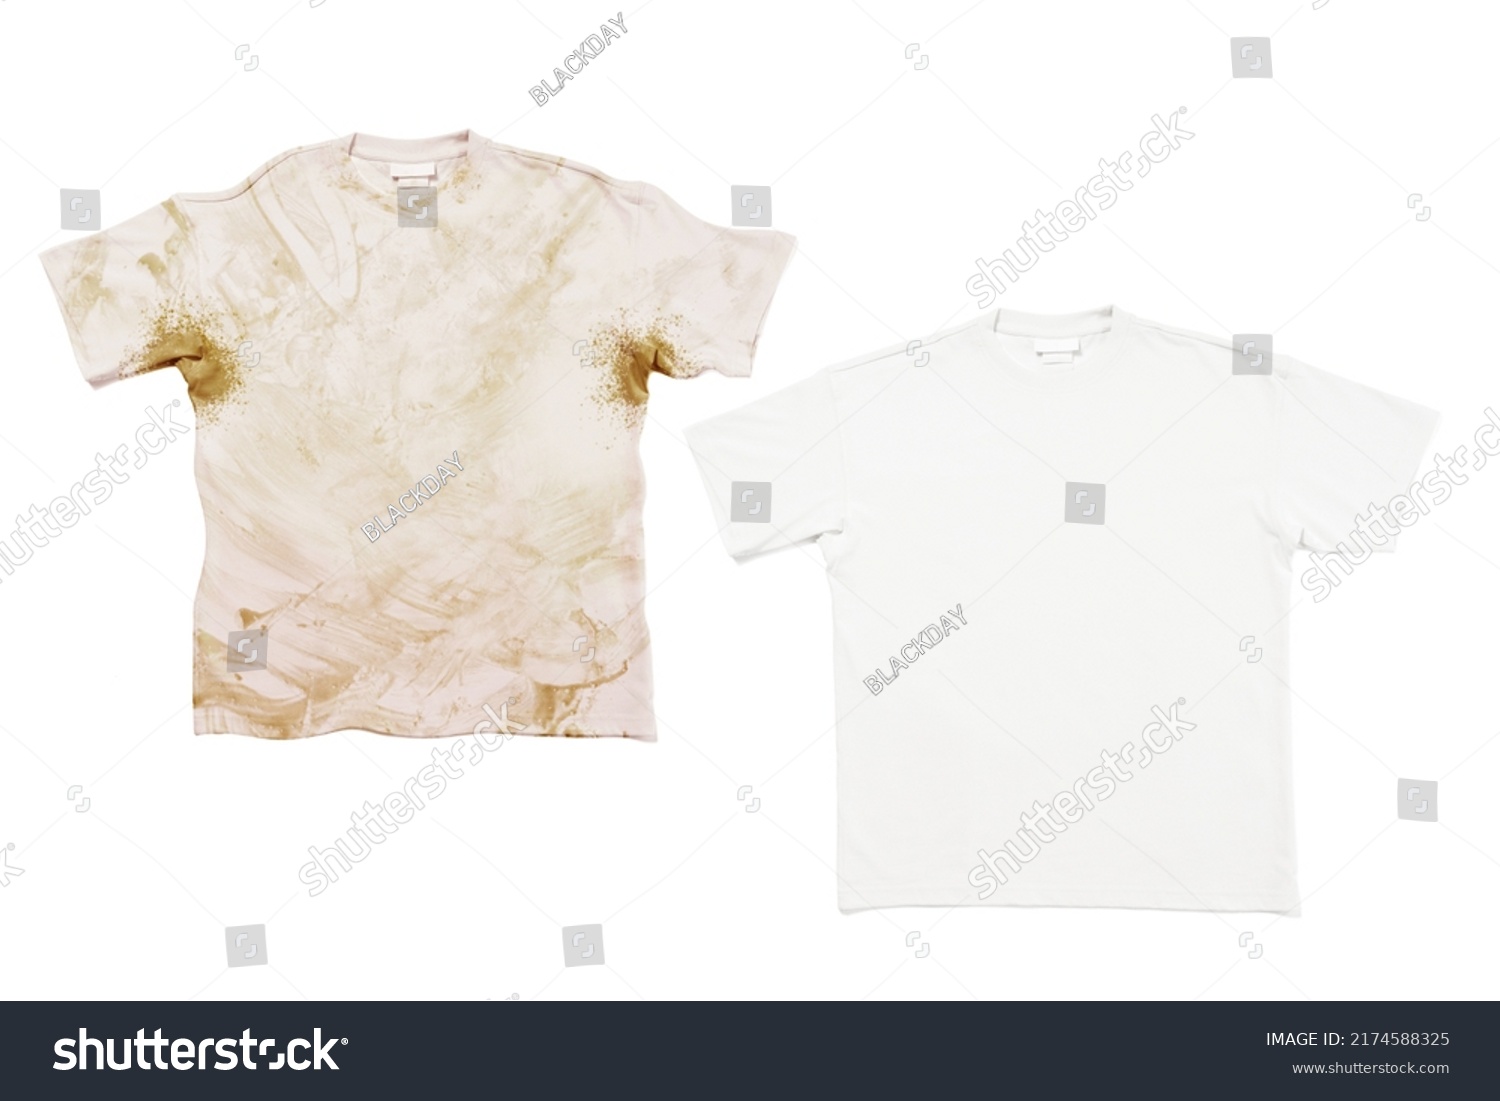 Comparison of white t-shirt before and after using laundry detergent or bleach on white background #2174588325